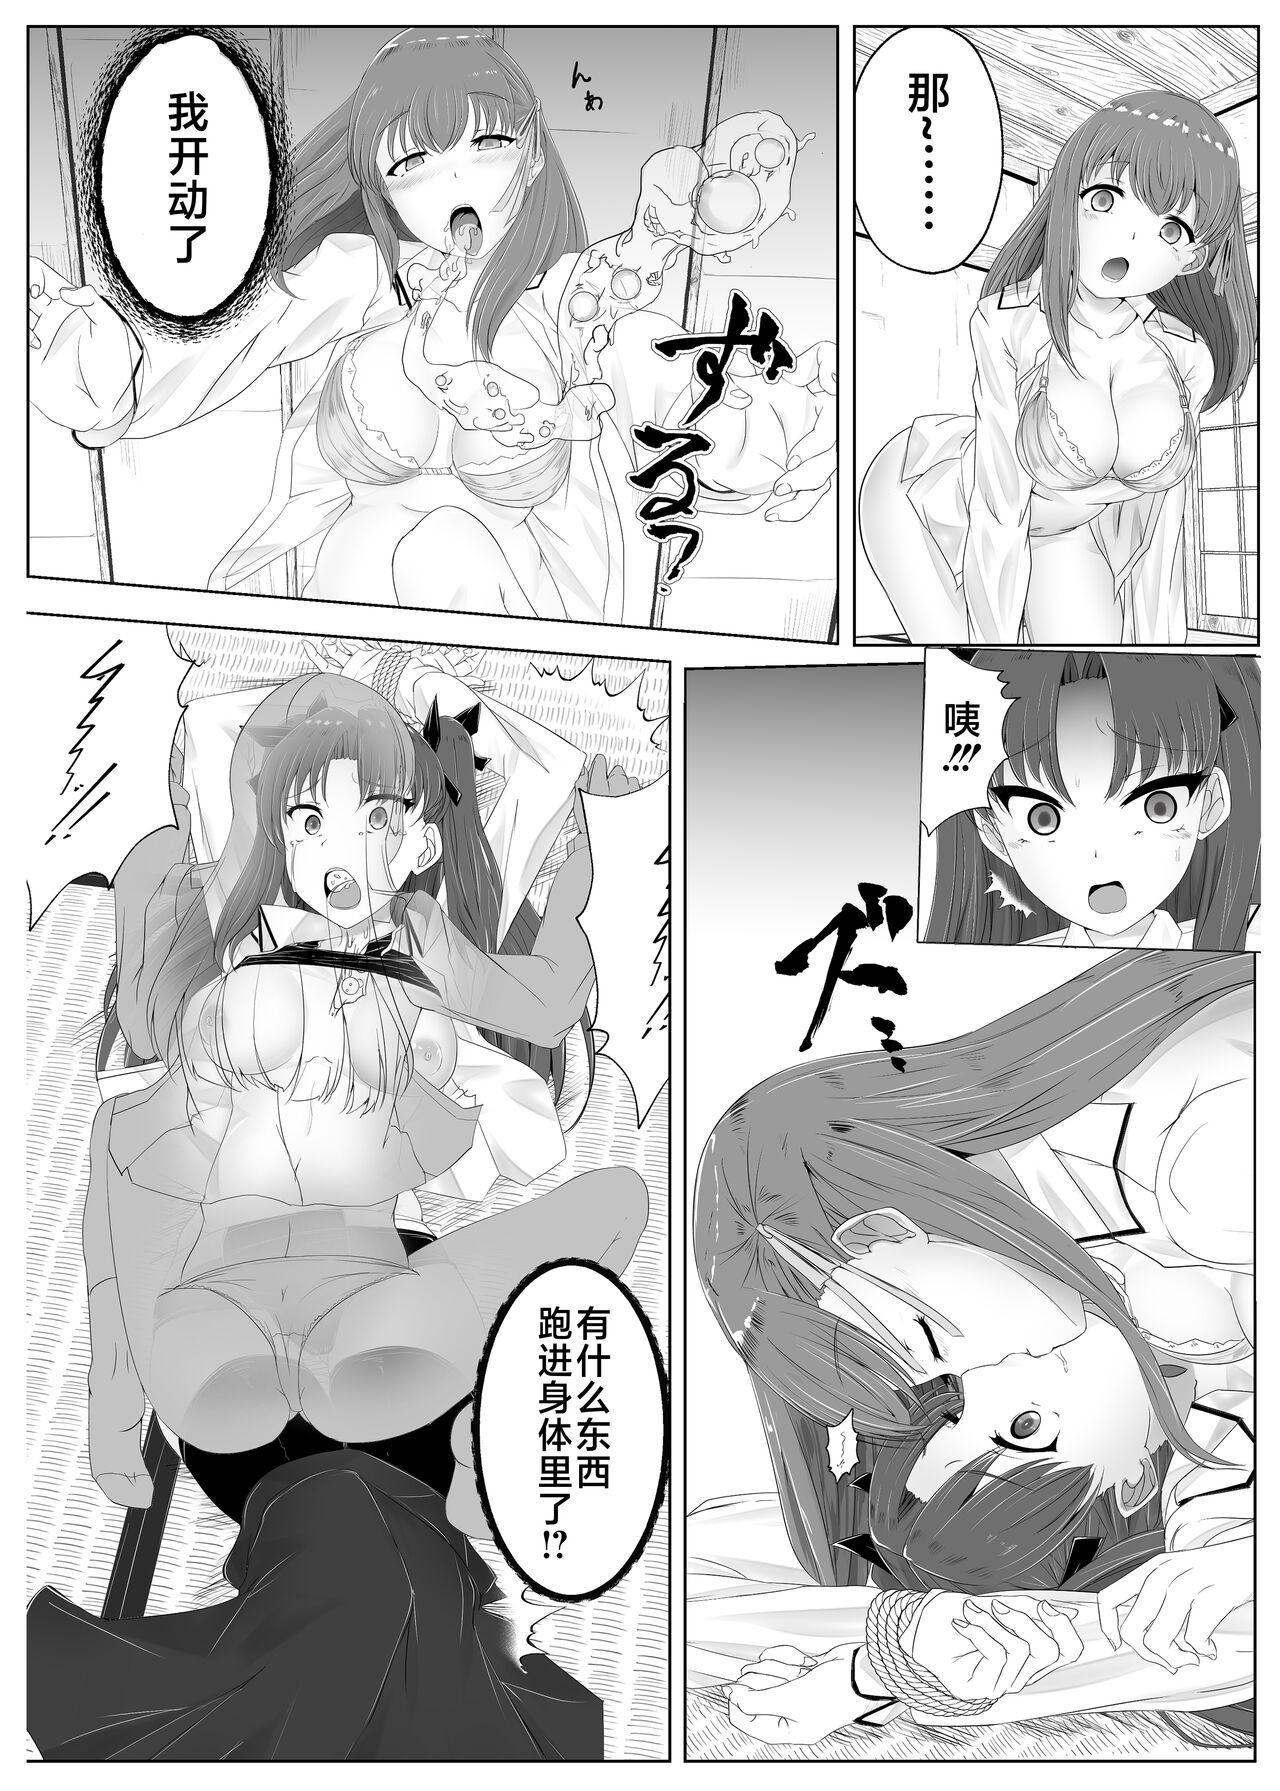 Humiliation 遠坂凛乗り換え乗っ取り - Fate stay night Off - Page 4